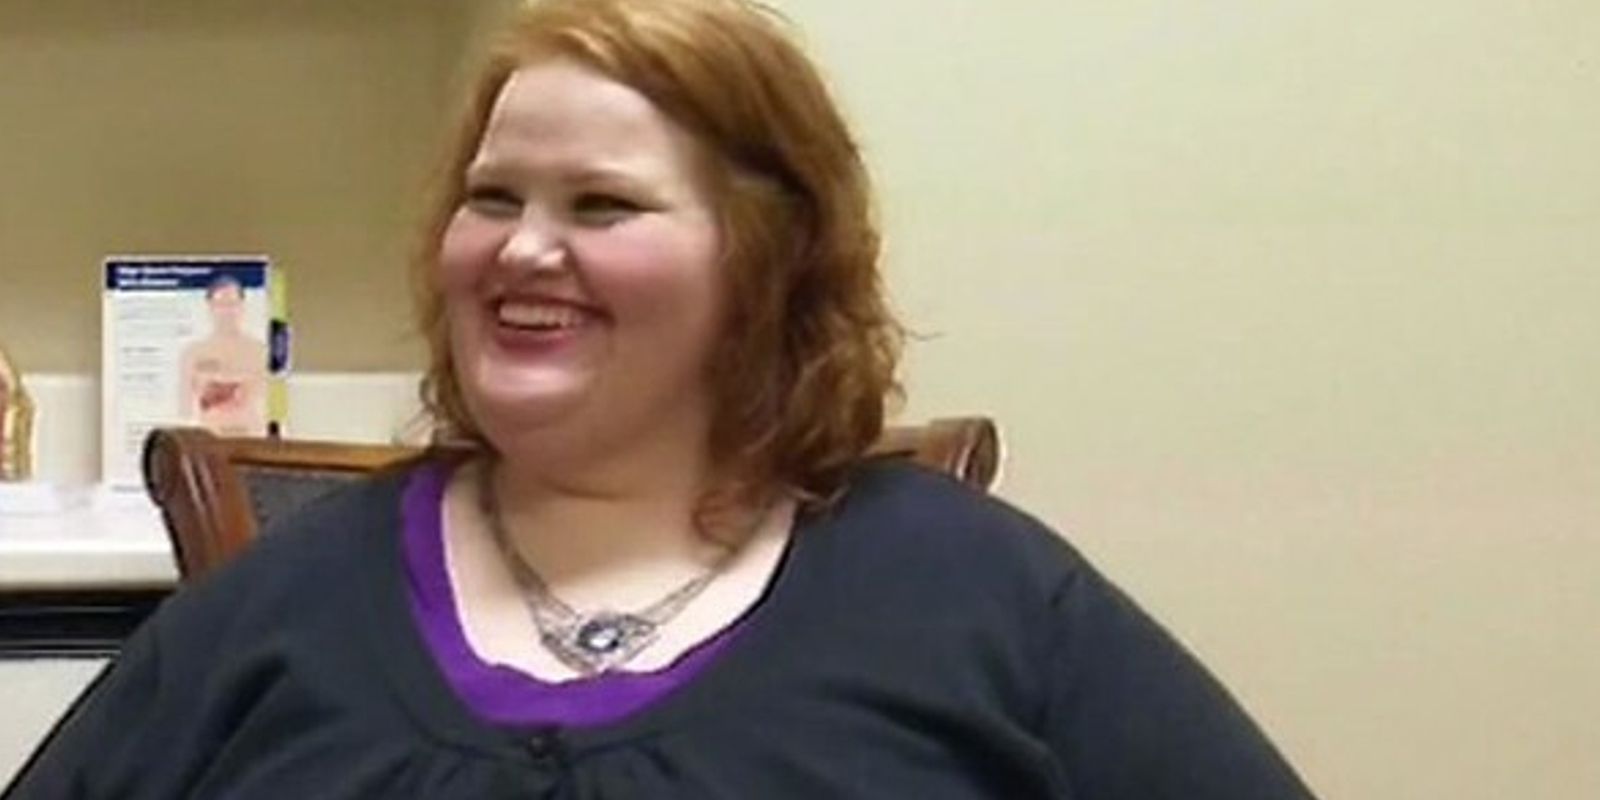 Nikki Webster My 600 Lb Life wearing black top and necklace smling